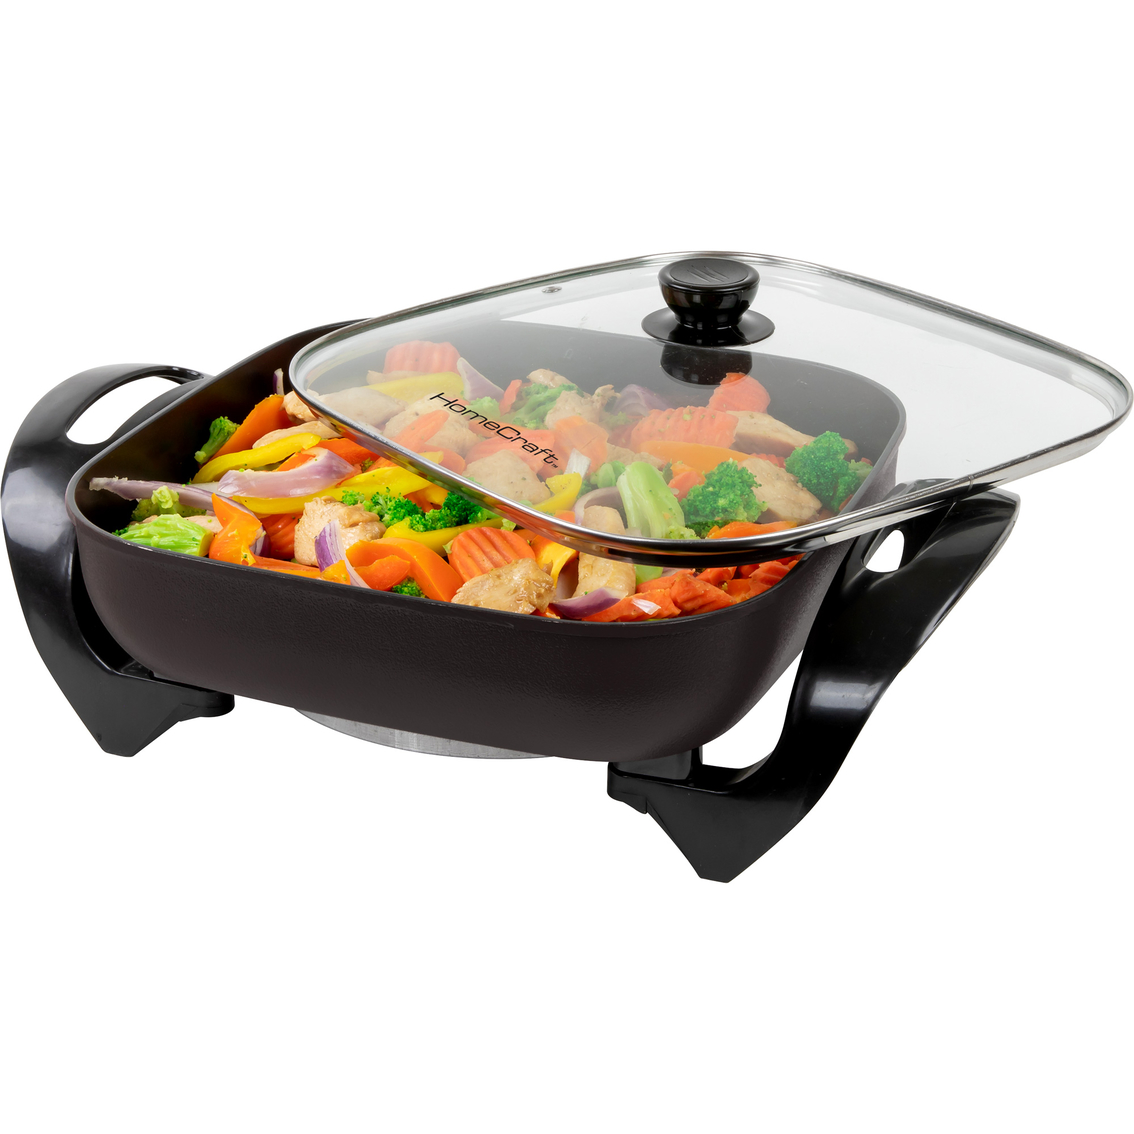 HomeCraft 12 in. Electric Non-Stick Skillet